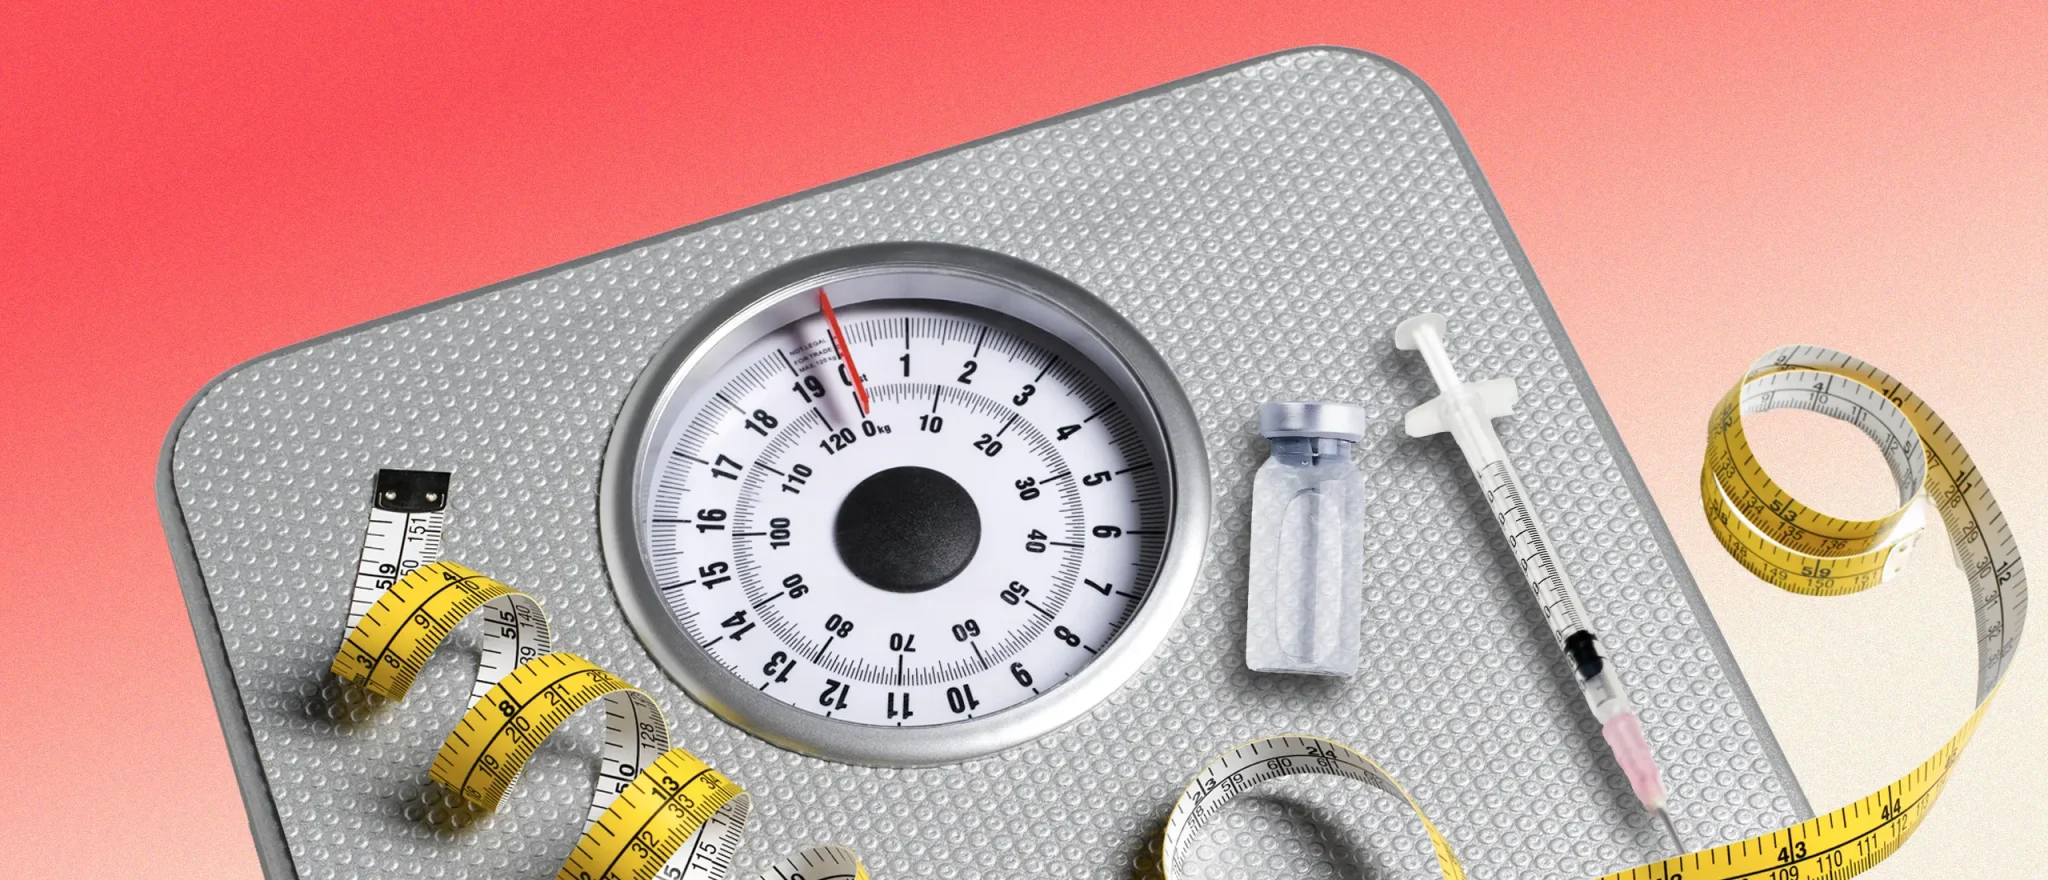 Sermorelin for Weight Loss: Does It Work?